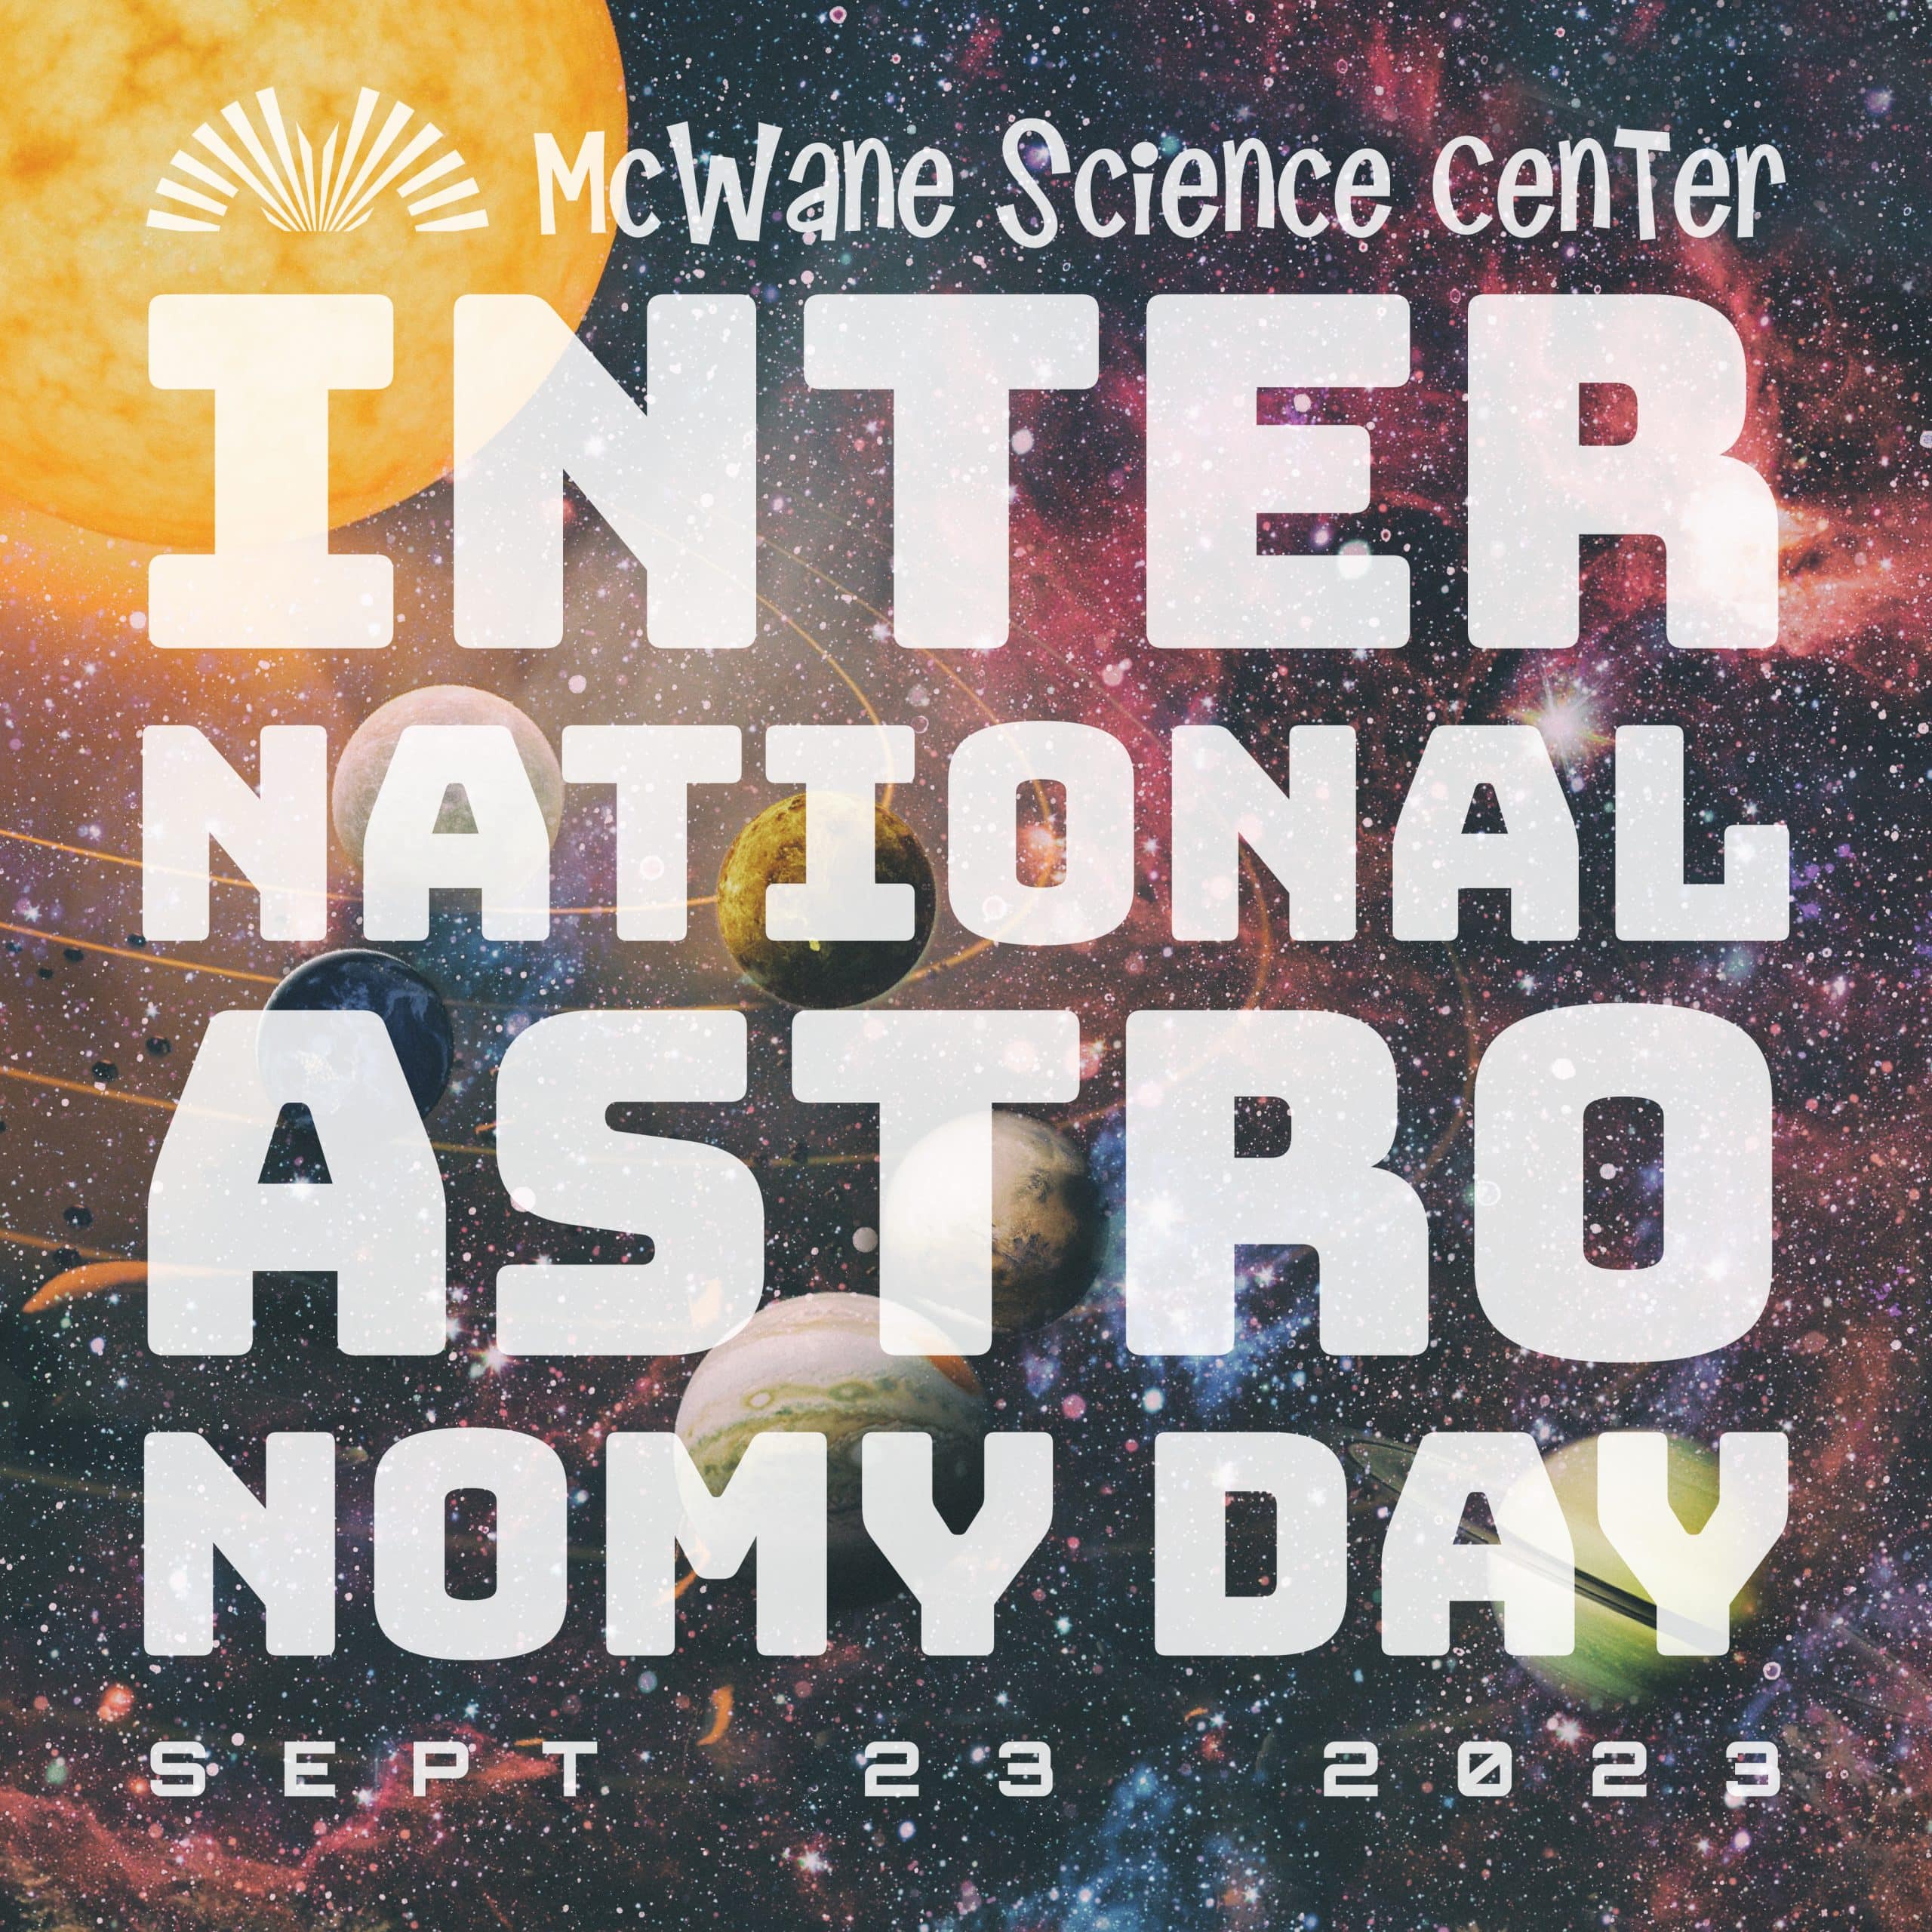 happy national astronomy day